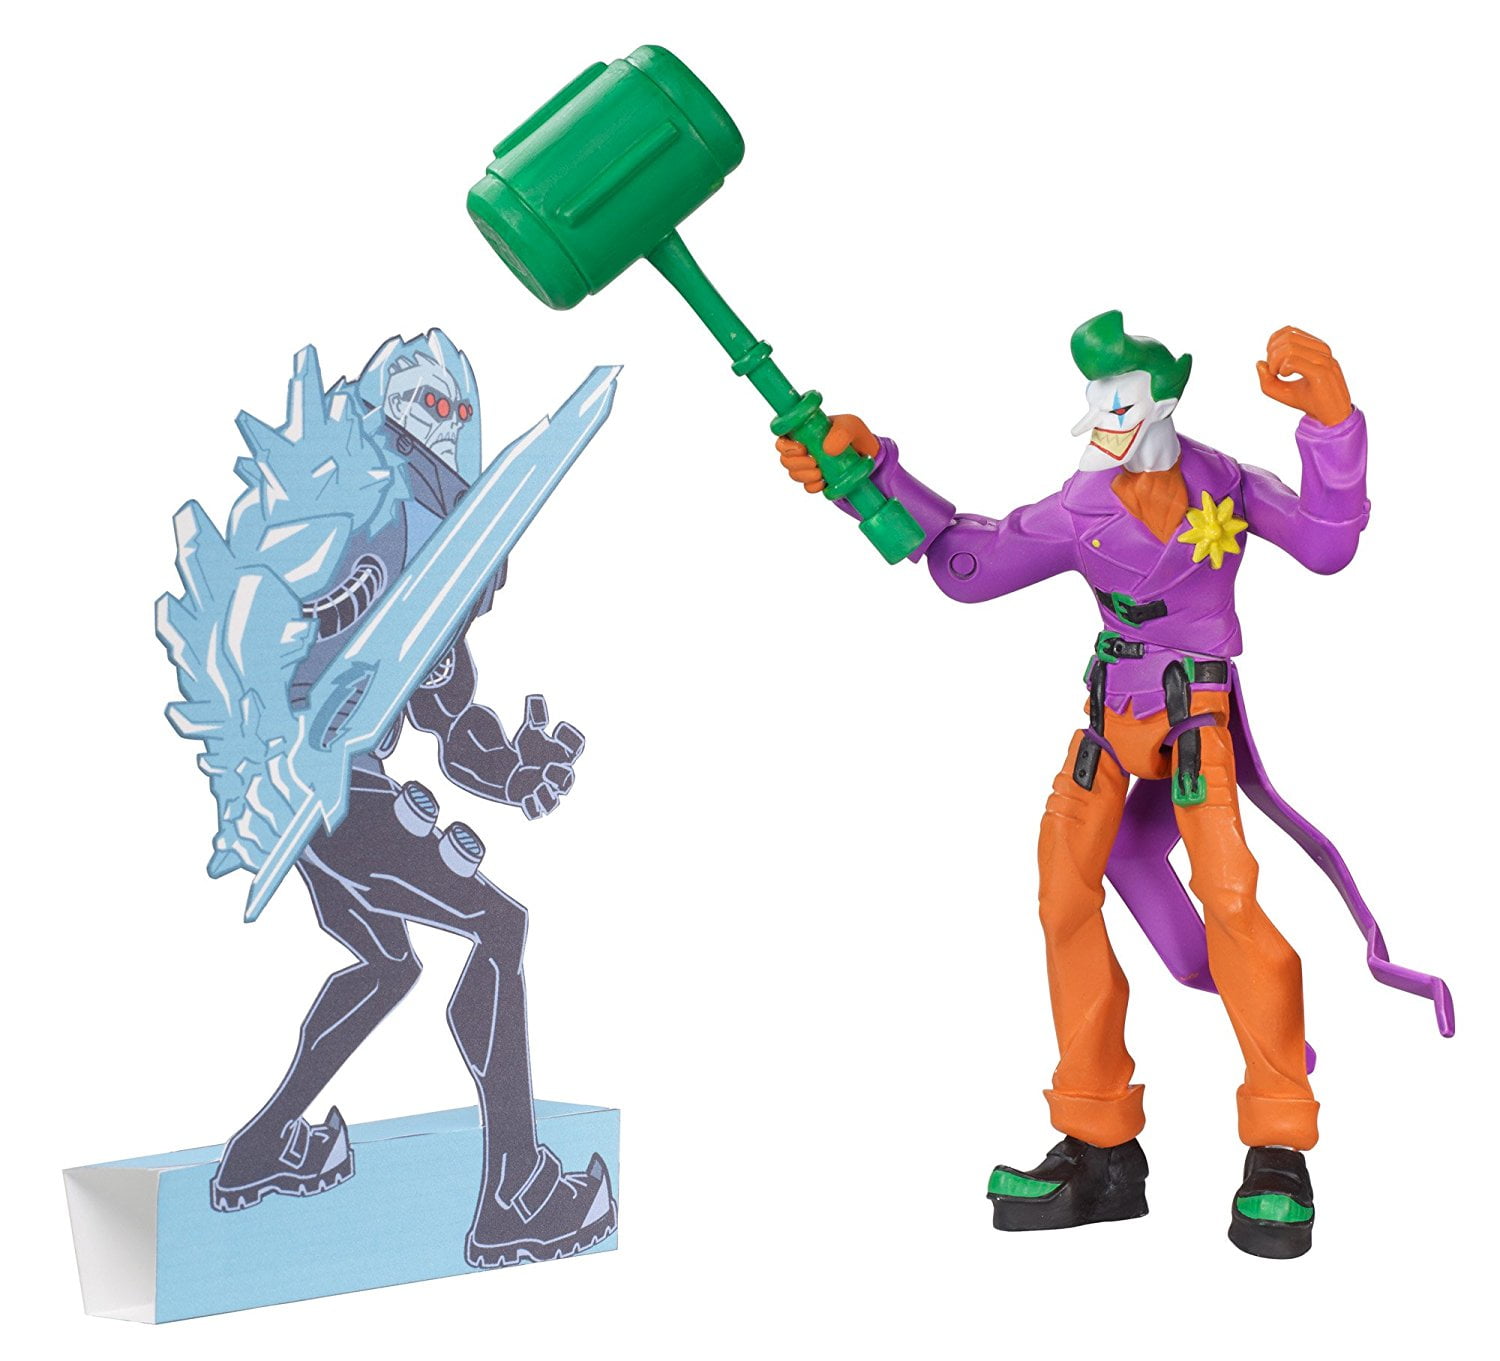 Batman Power Attack Fighting Boxing Glove Basher The Joker Batman Is Ready For Any Mission Whatever The Objective By Mattel Walmart Com